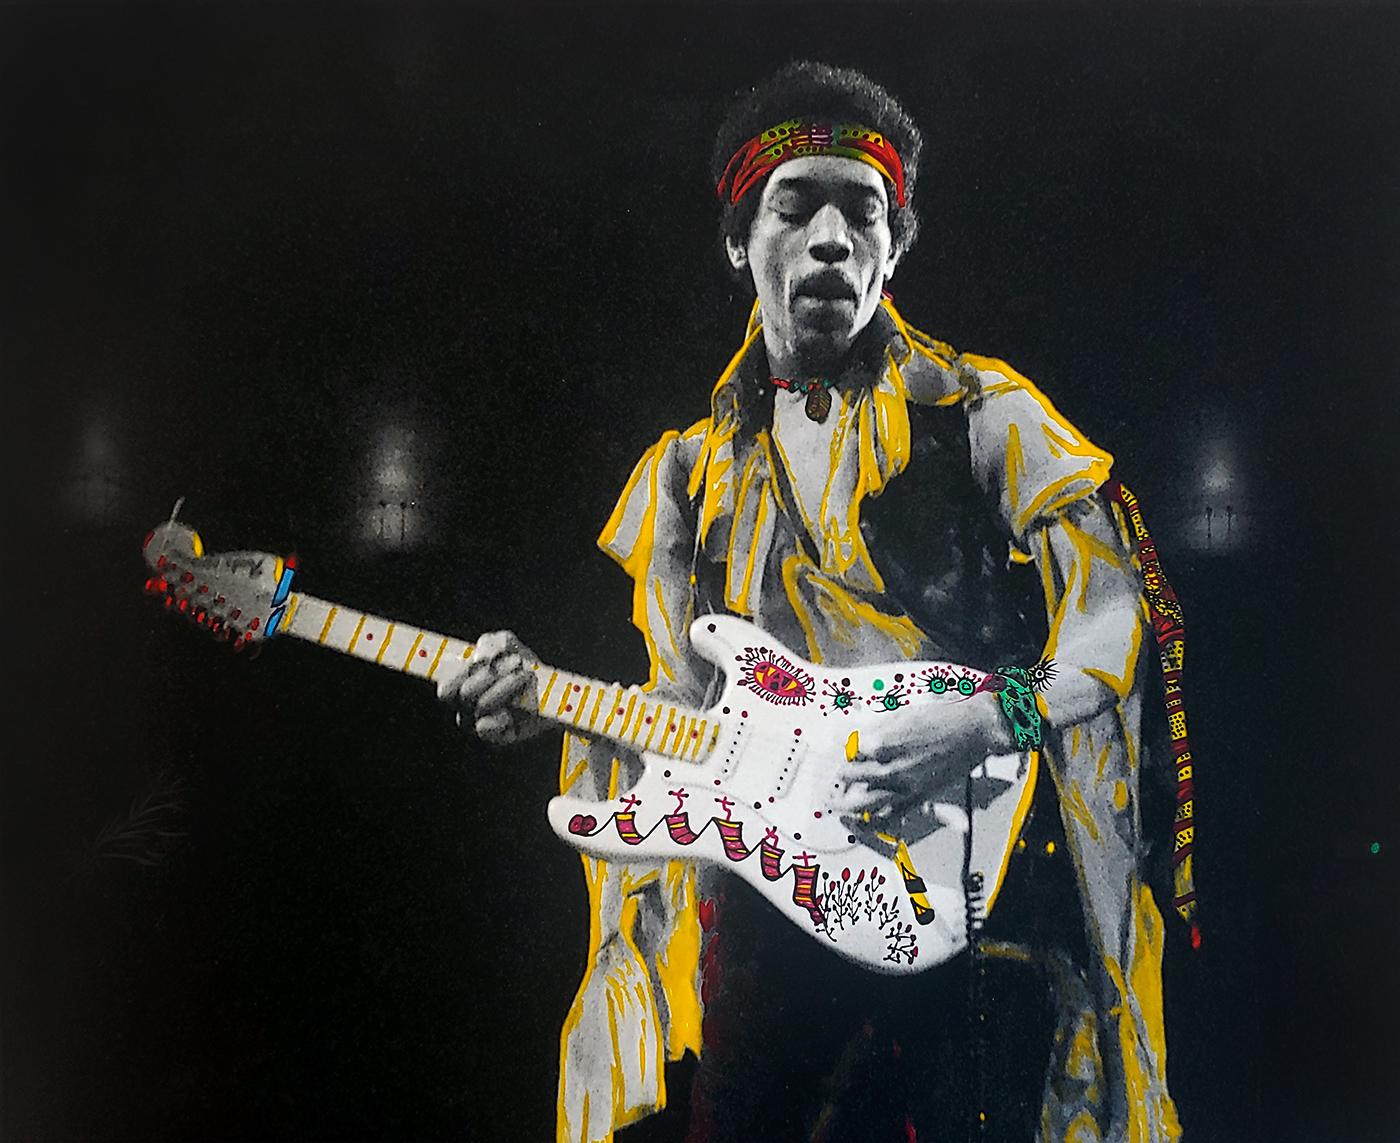 Thomas Monaster has photographed many great rock and roll legends like John Lennon, Bob Dylan, The Rolling Stones, Janis Joplin and Jimi Hendrix to name just a few. We are please to offer this unique one of a kind image of Jimi Hendrix, photographed